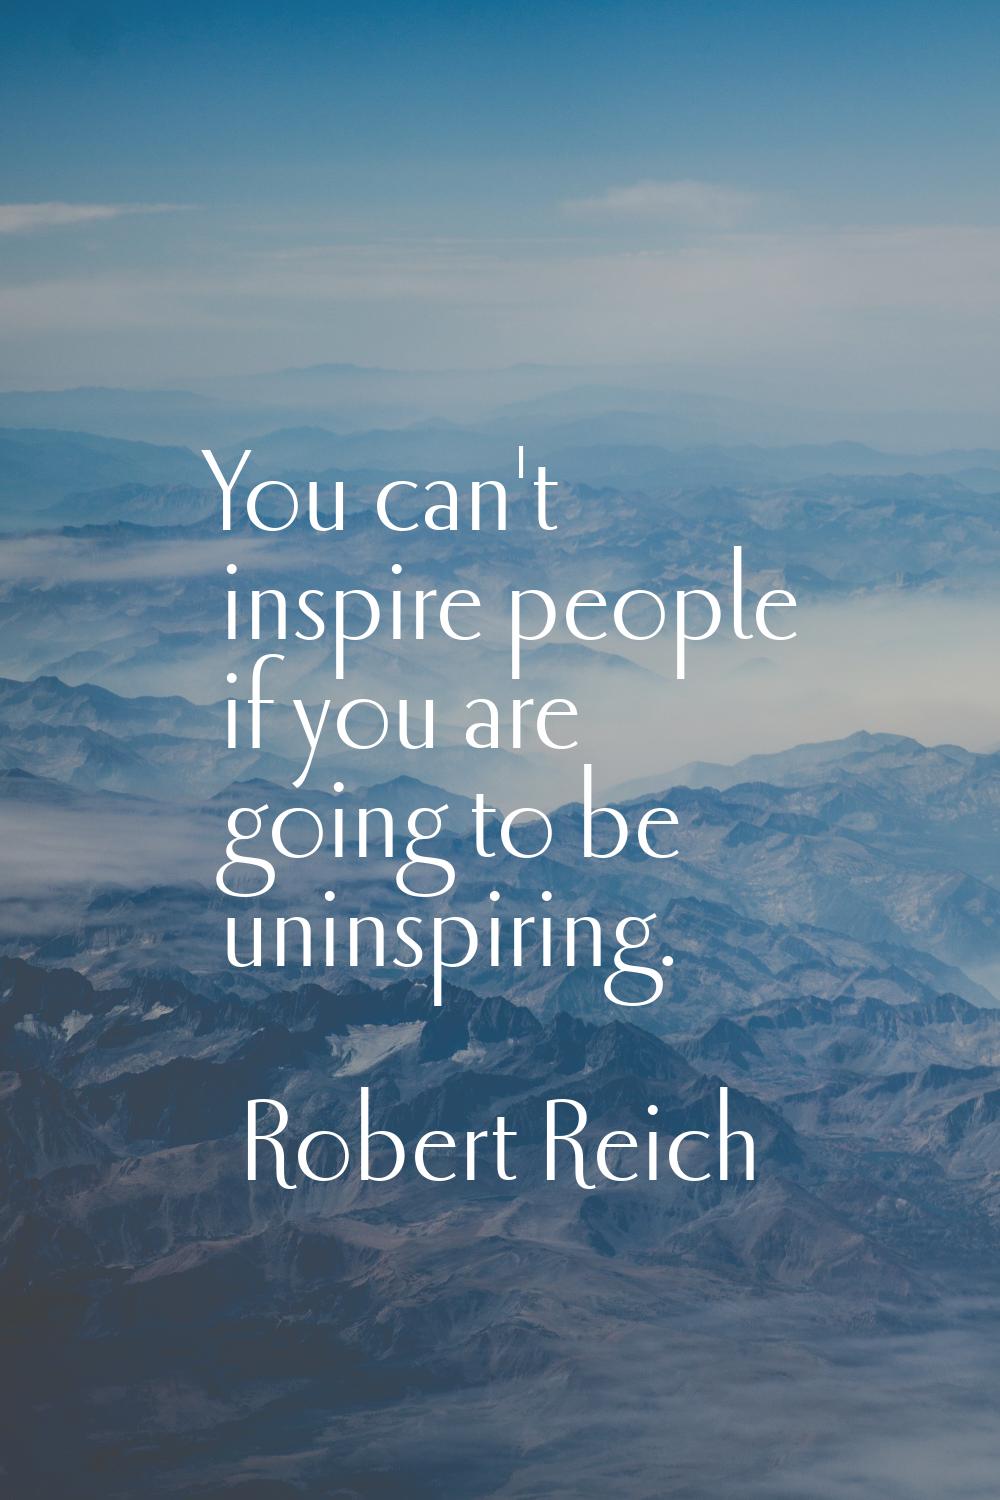 You can't inspire people if you are going to be uninspiring.